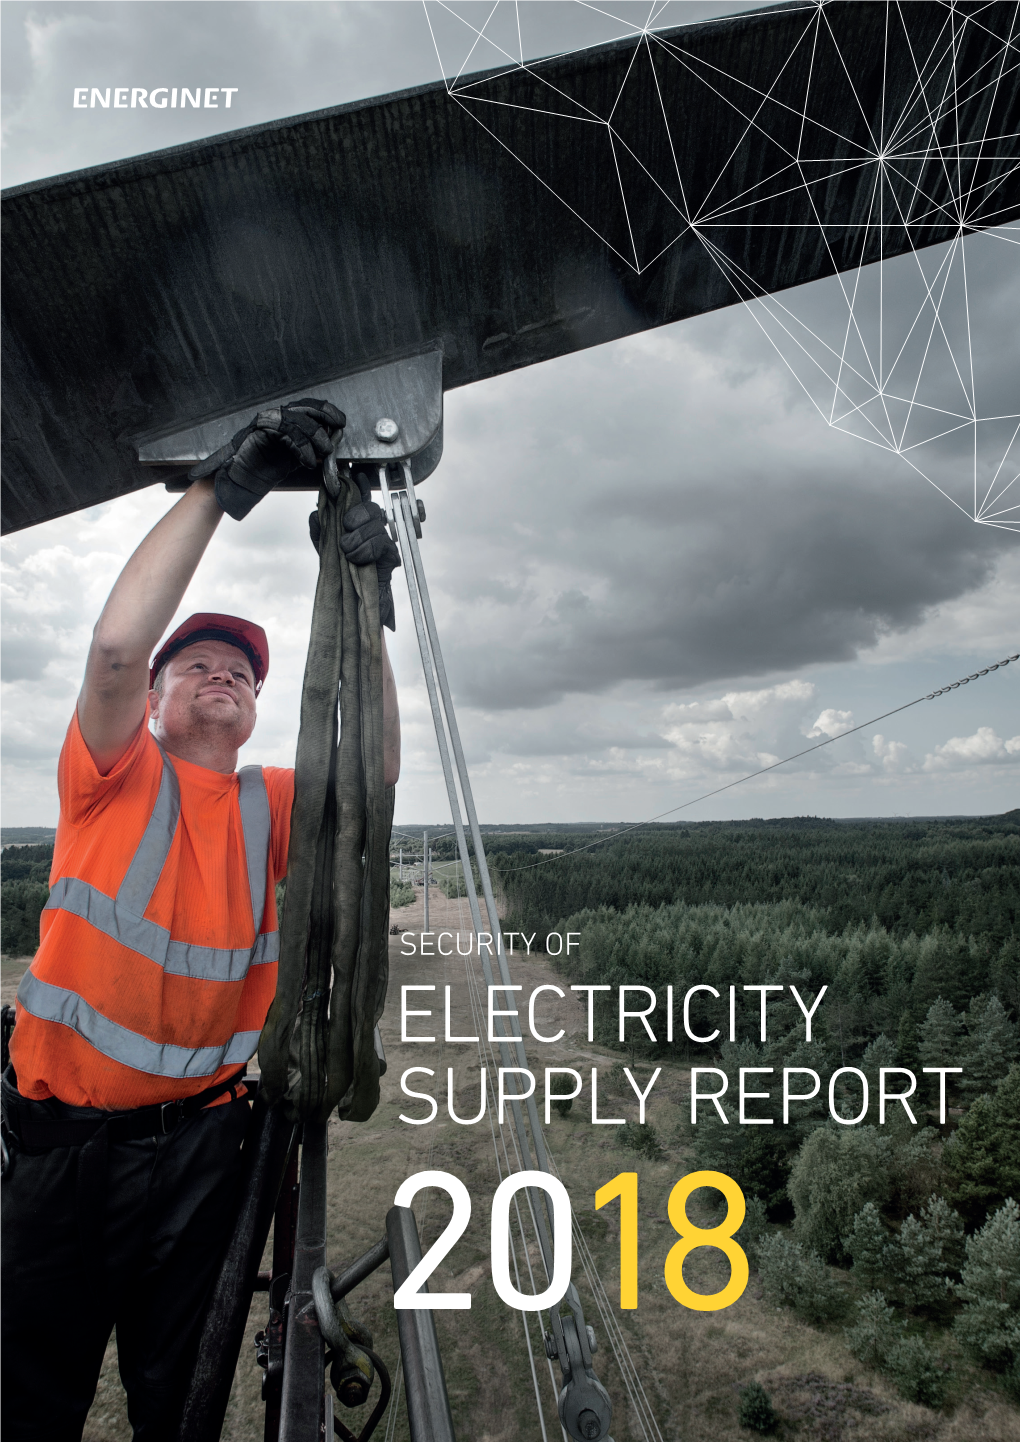 SECURITY of ELECTRICITY SUPPLY REPORT 2018 2 Security of Electricity Supply Report 2018 Security of Electricity Supply Report 2018 3